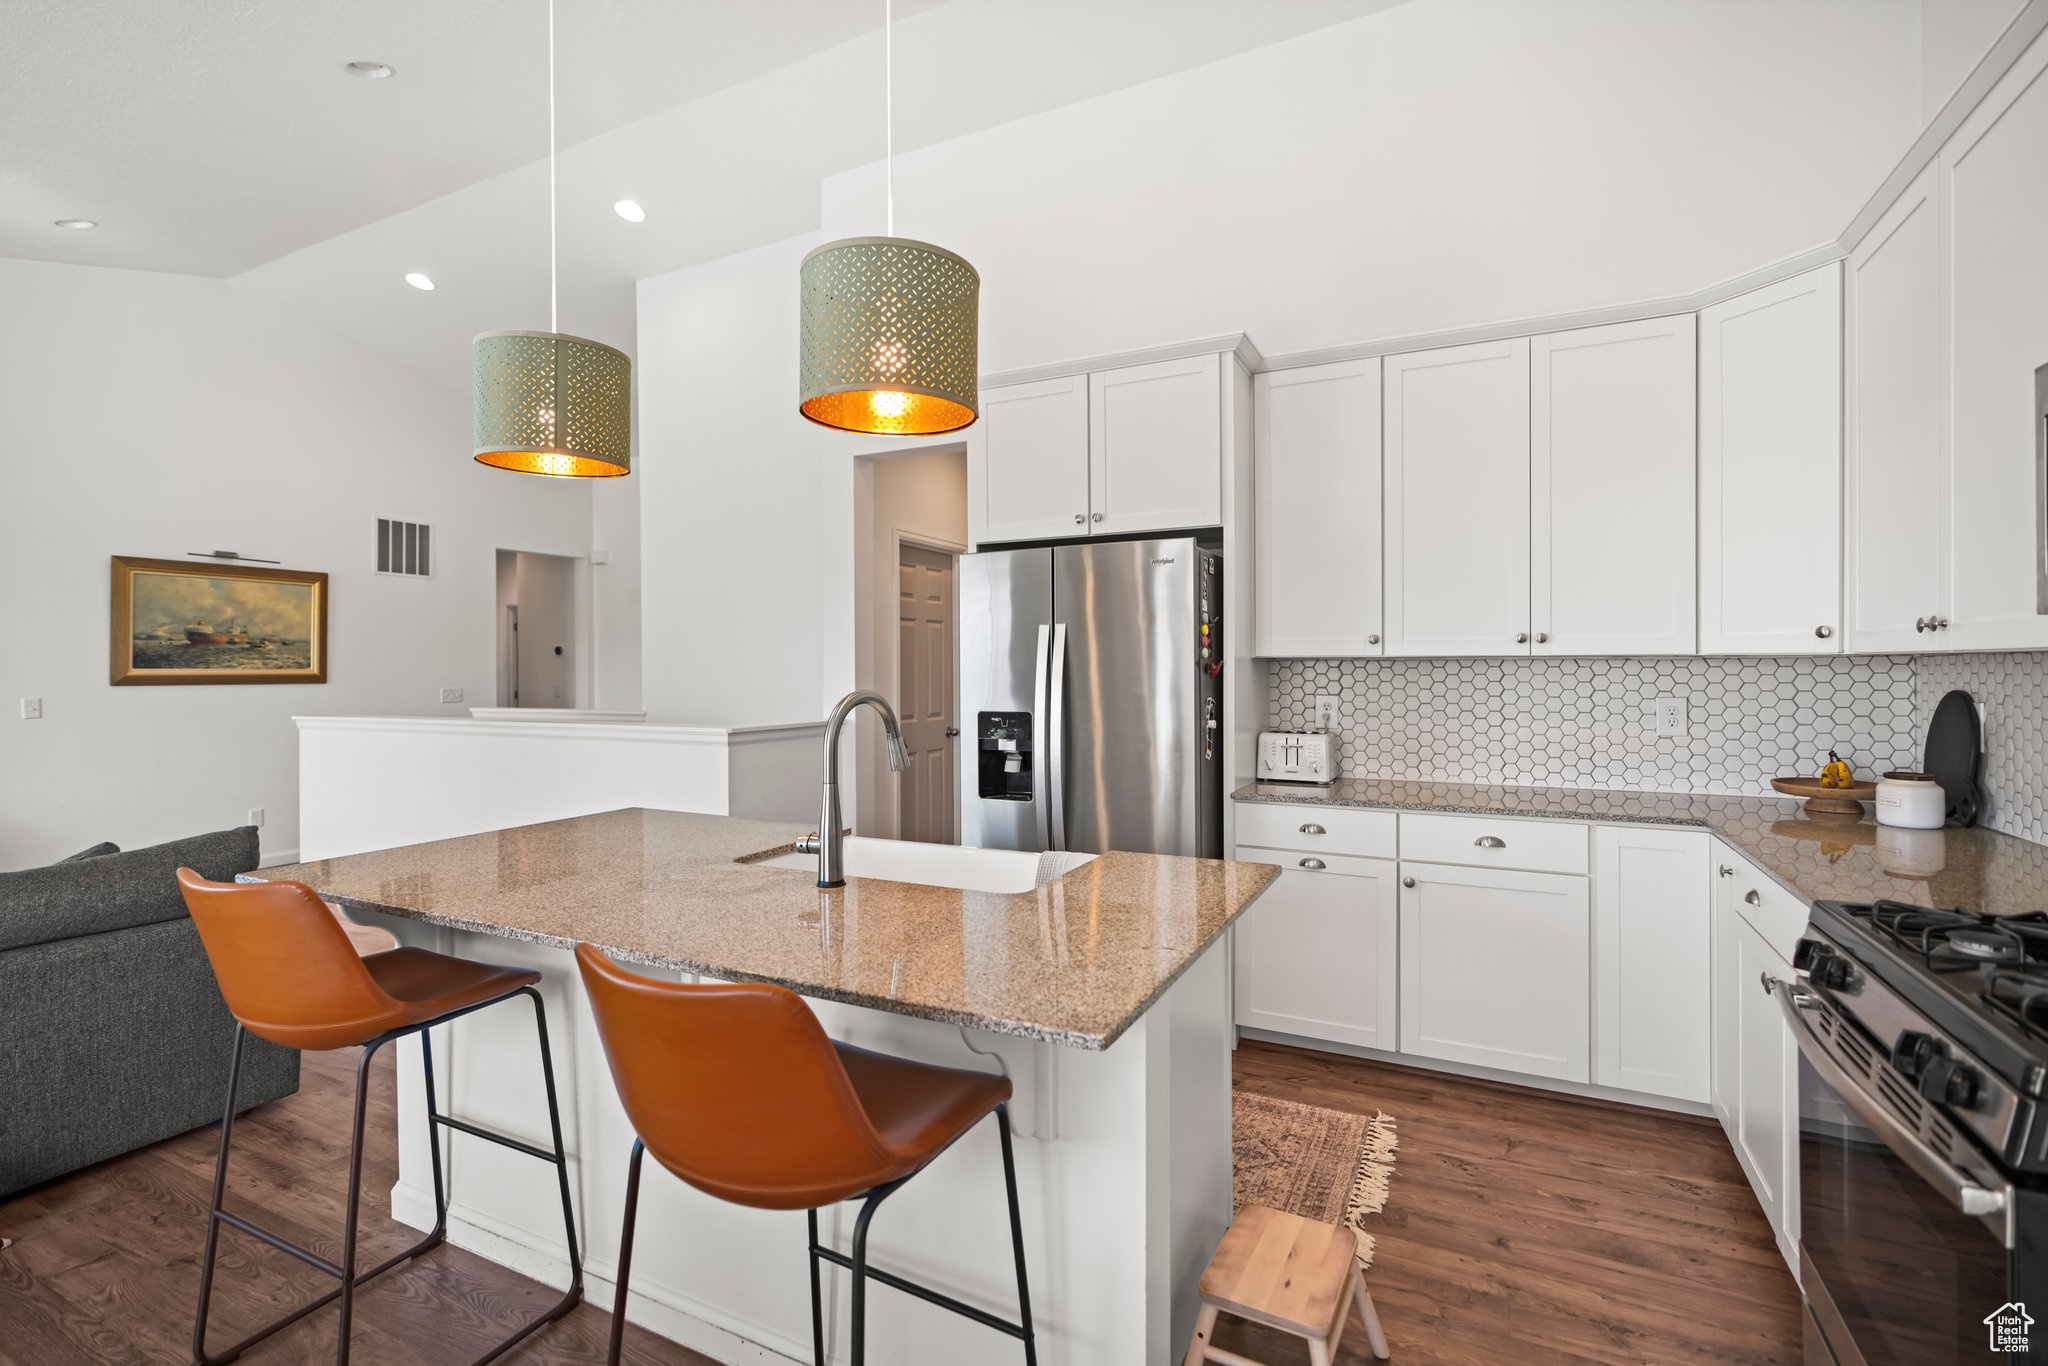 Kitchen featuring white cabinets, tasteful backsplash, appliances with stainless steel finishes, light stone countertops, and hanging light fixtures